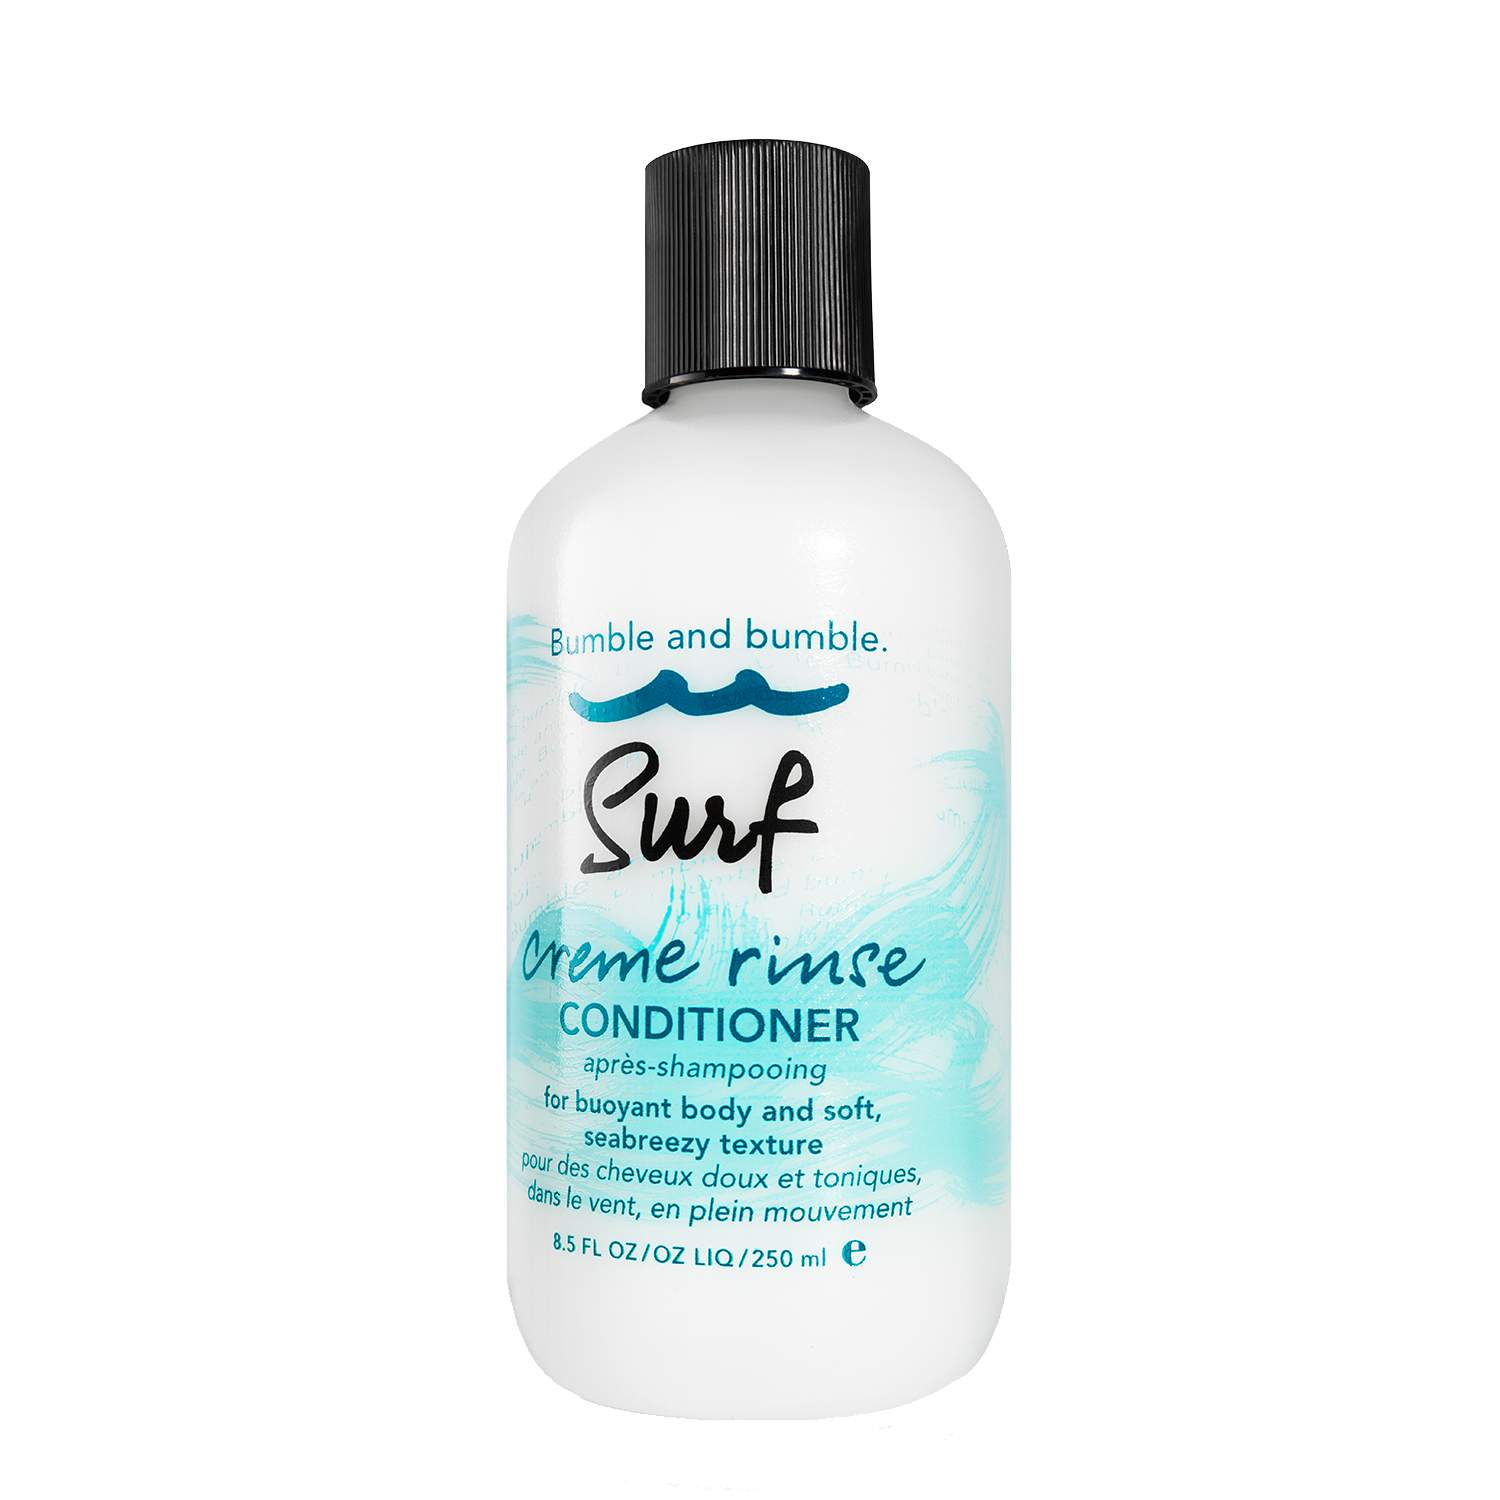 Bumble and bumble. Surf Creme Rinse Conditioner Bumble and bumble. Surf Creme Rinse Conditioner 1